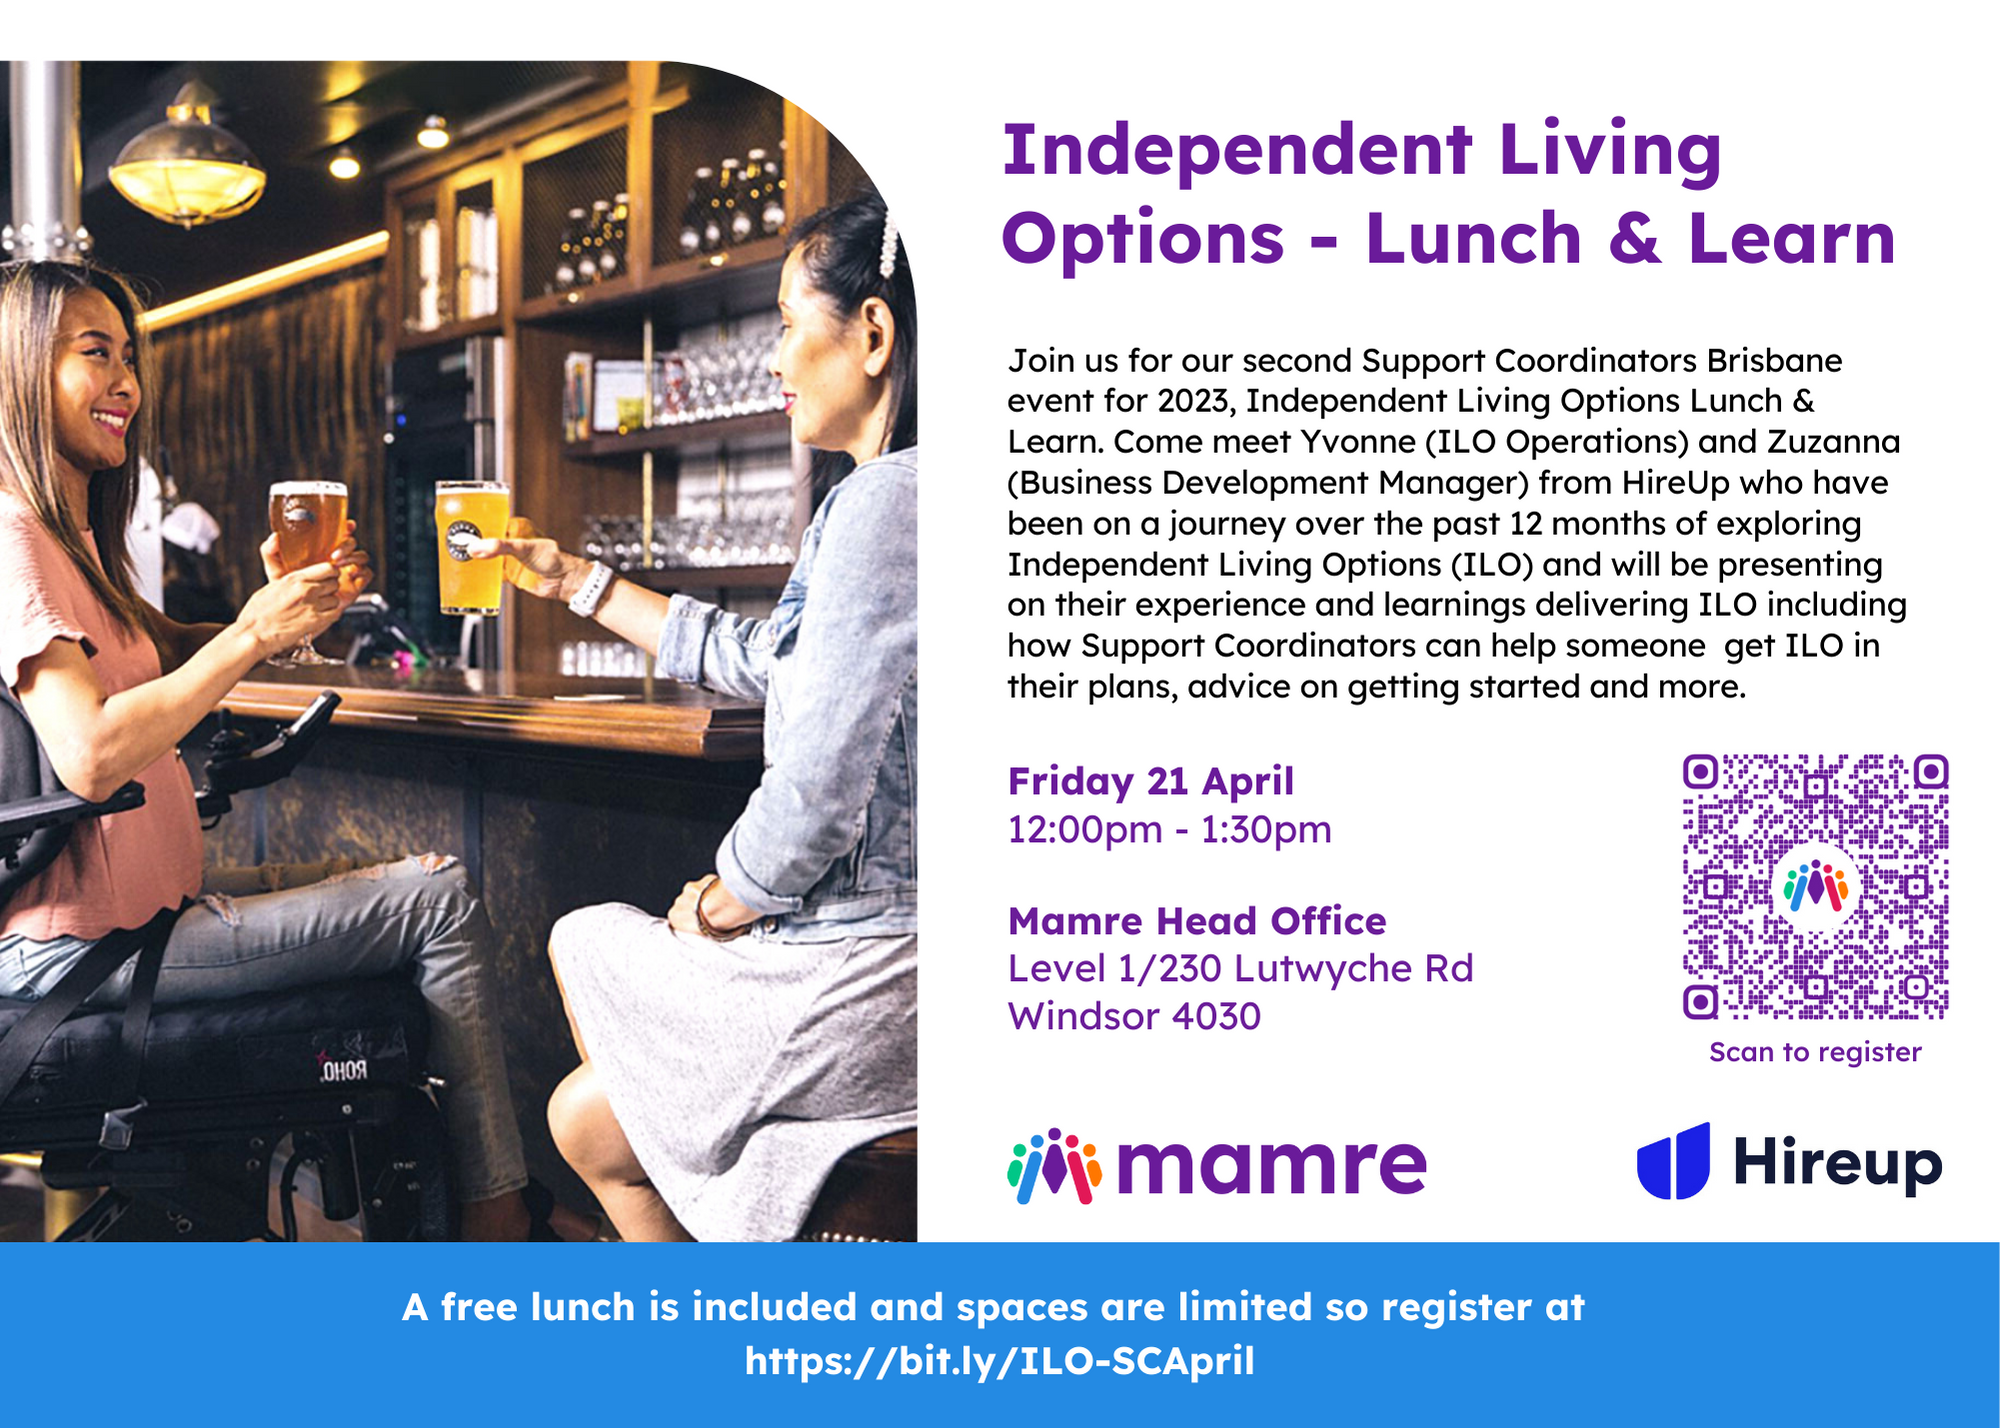 Independent Living Options event flyer